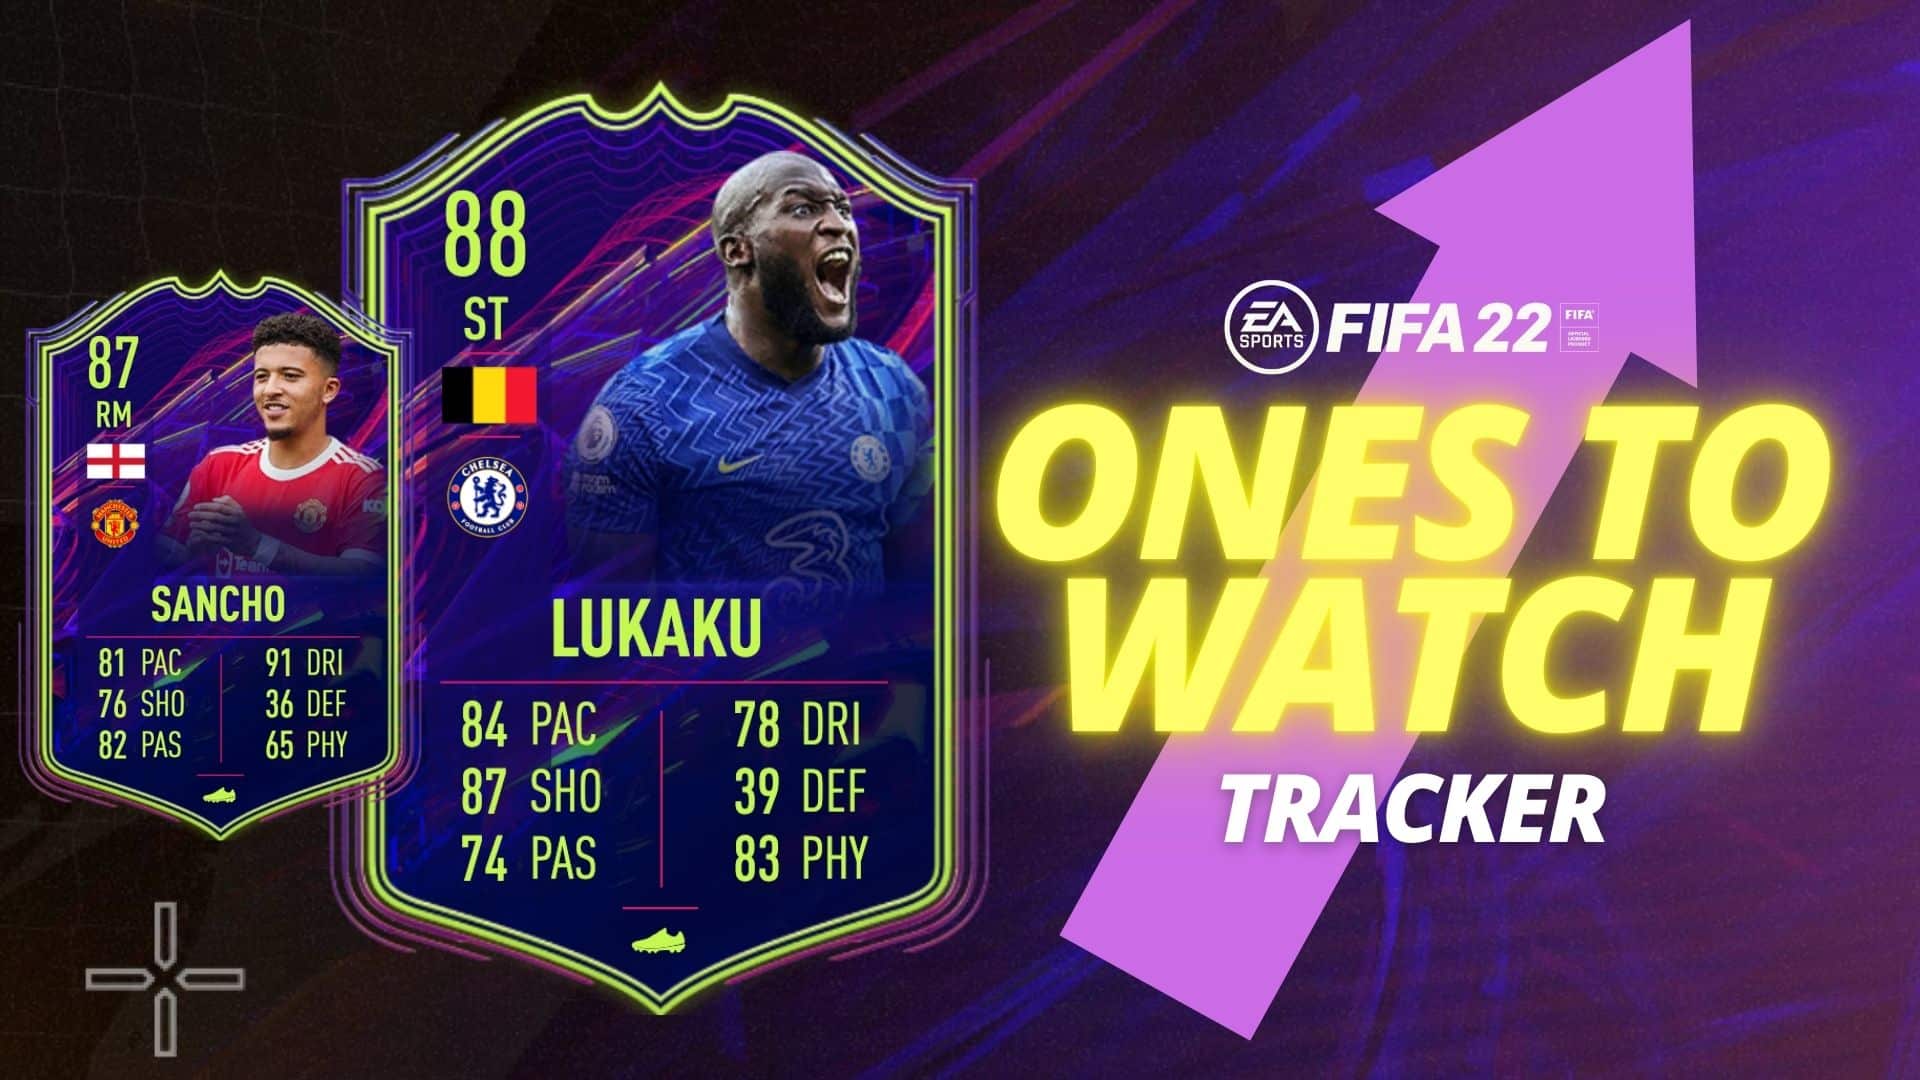 FIFA 21 Ones to Watch Team 2 live: OTW release time & players list